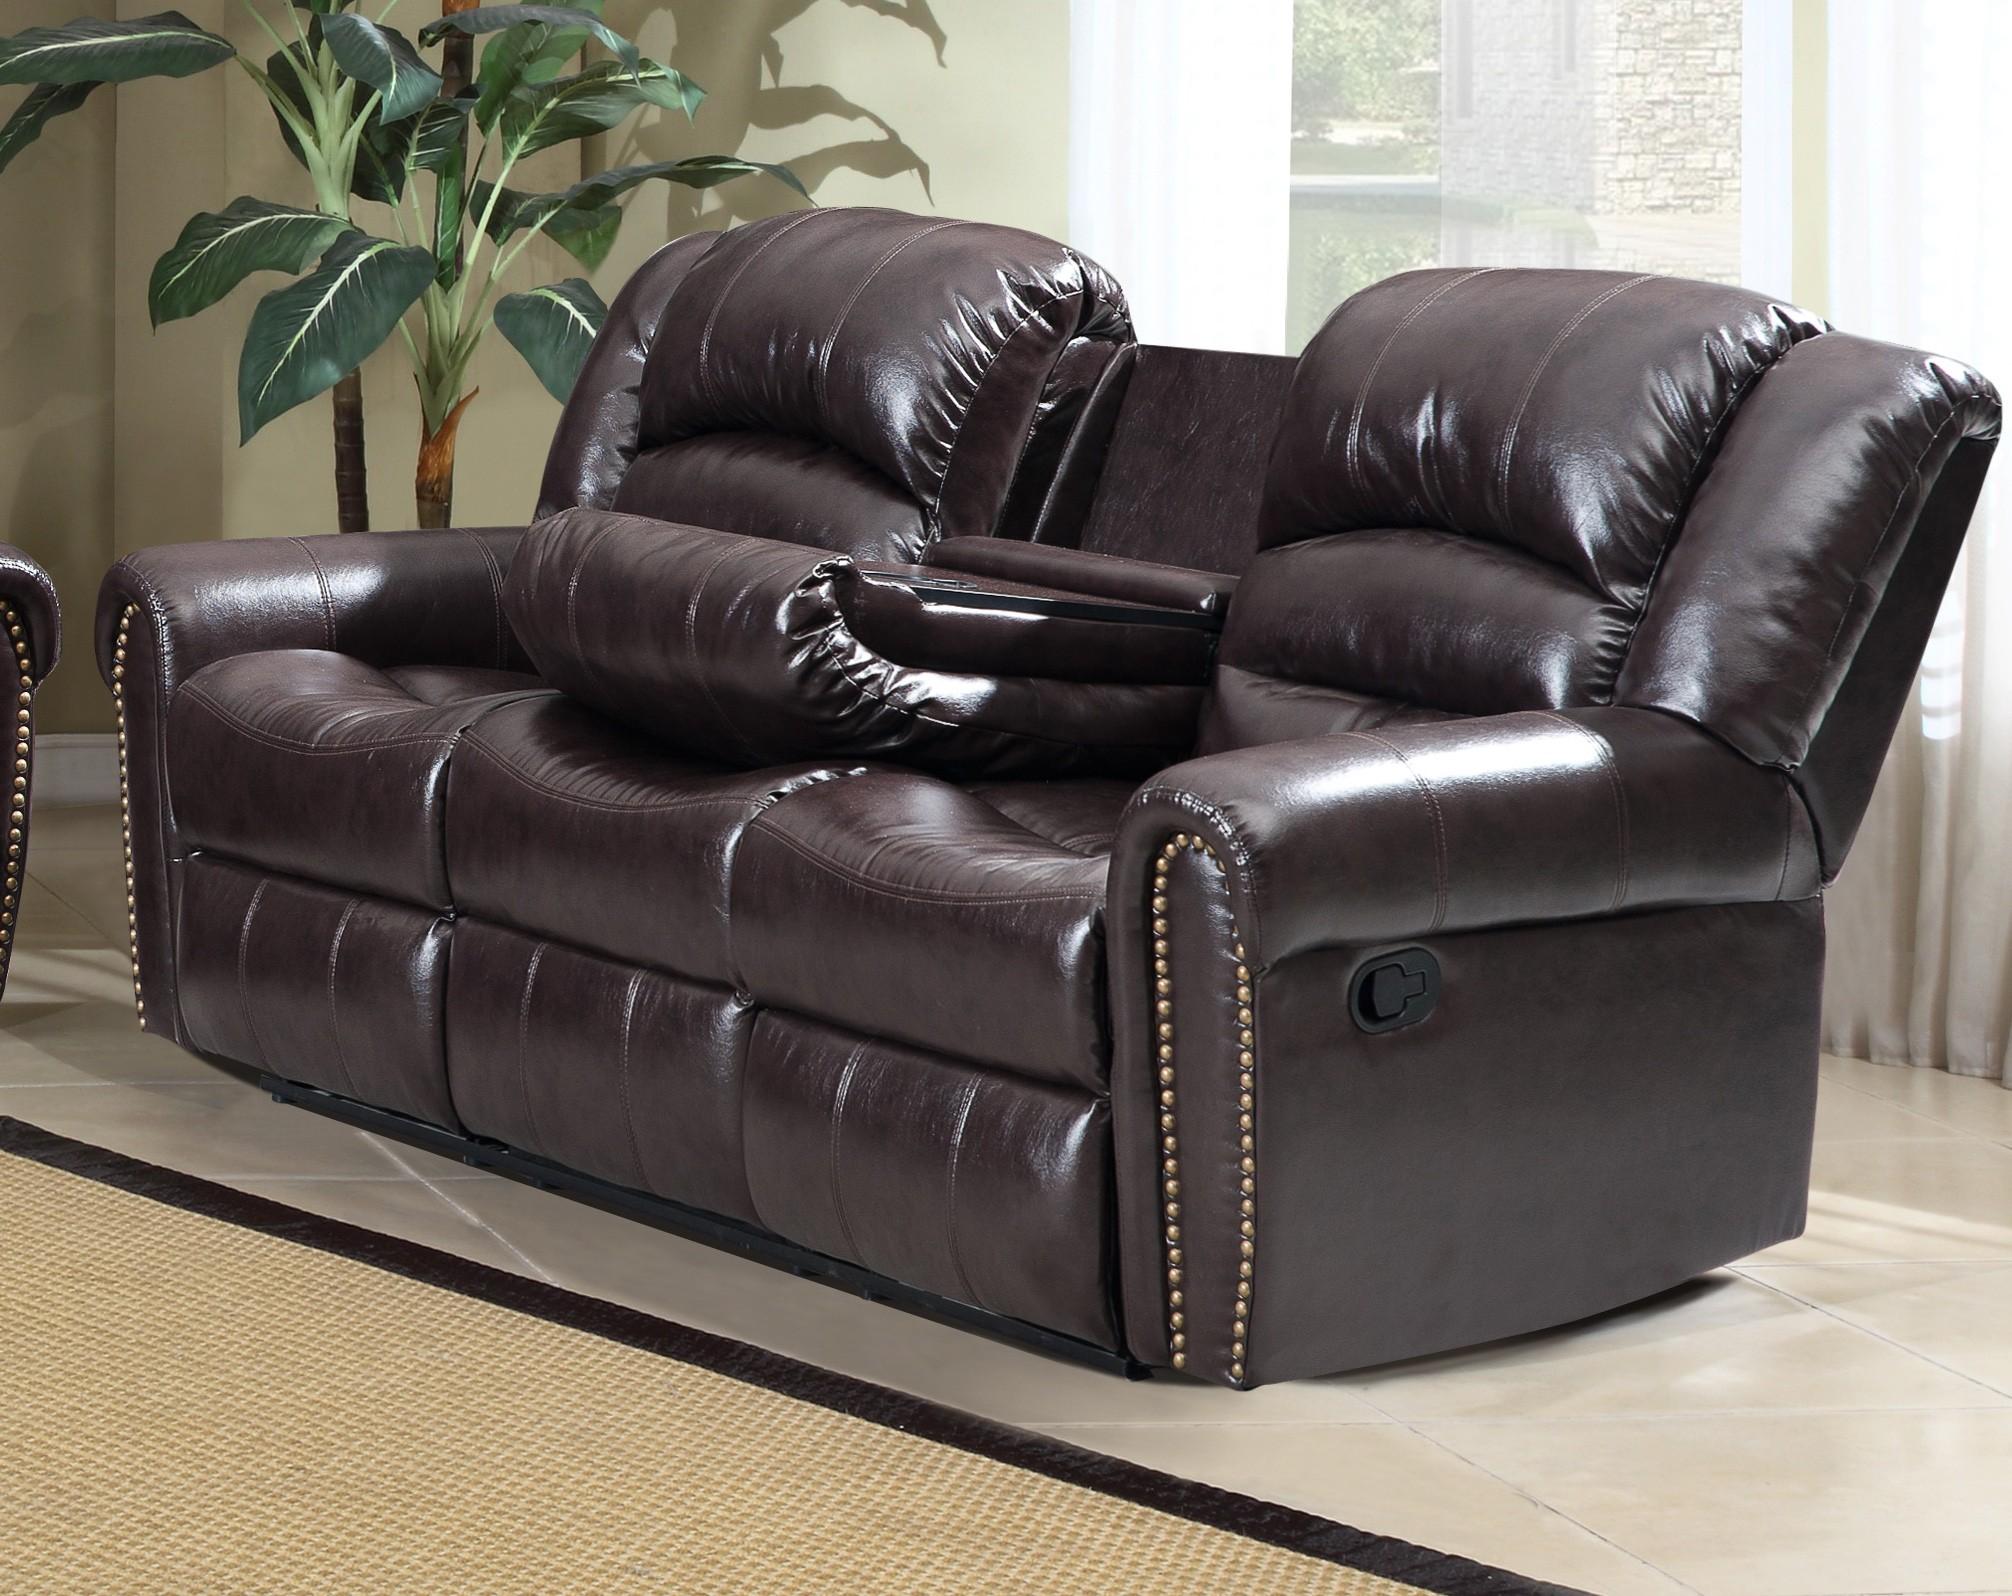 

    
Meridian 684 Chelsea Living Room Set 3pcs in Brown Bonded Leather Contemporary
